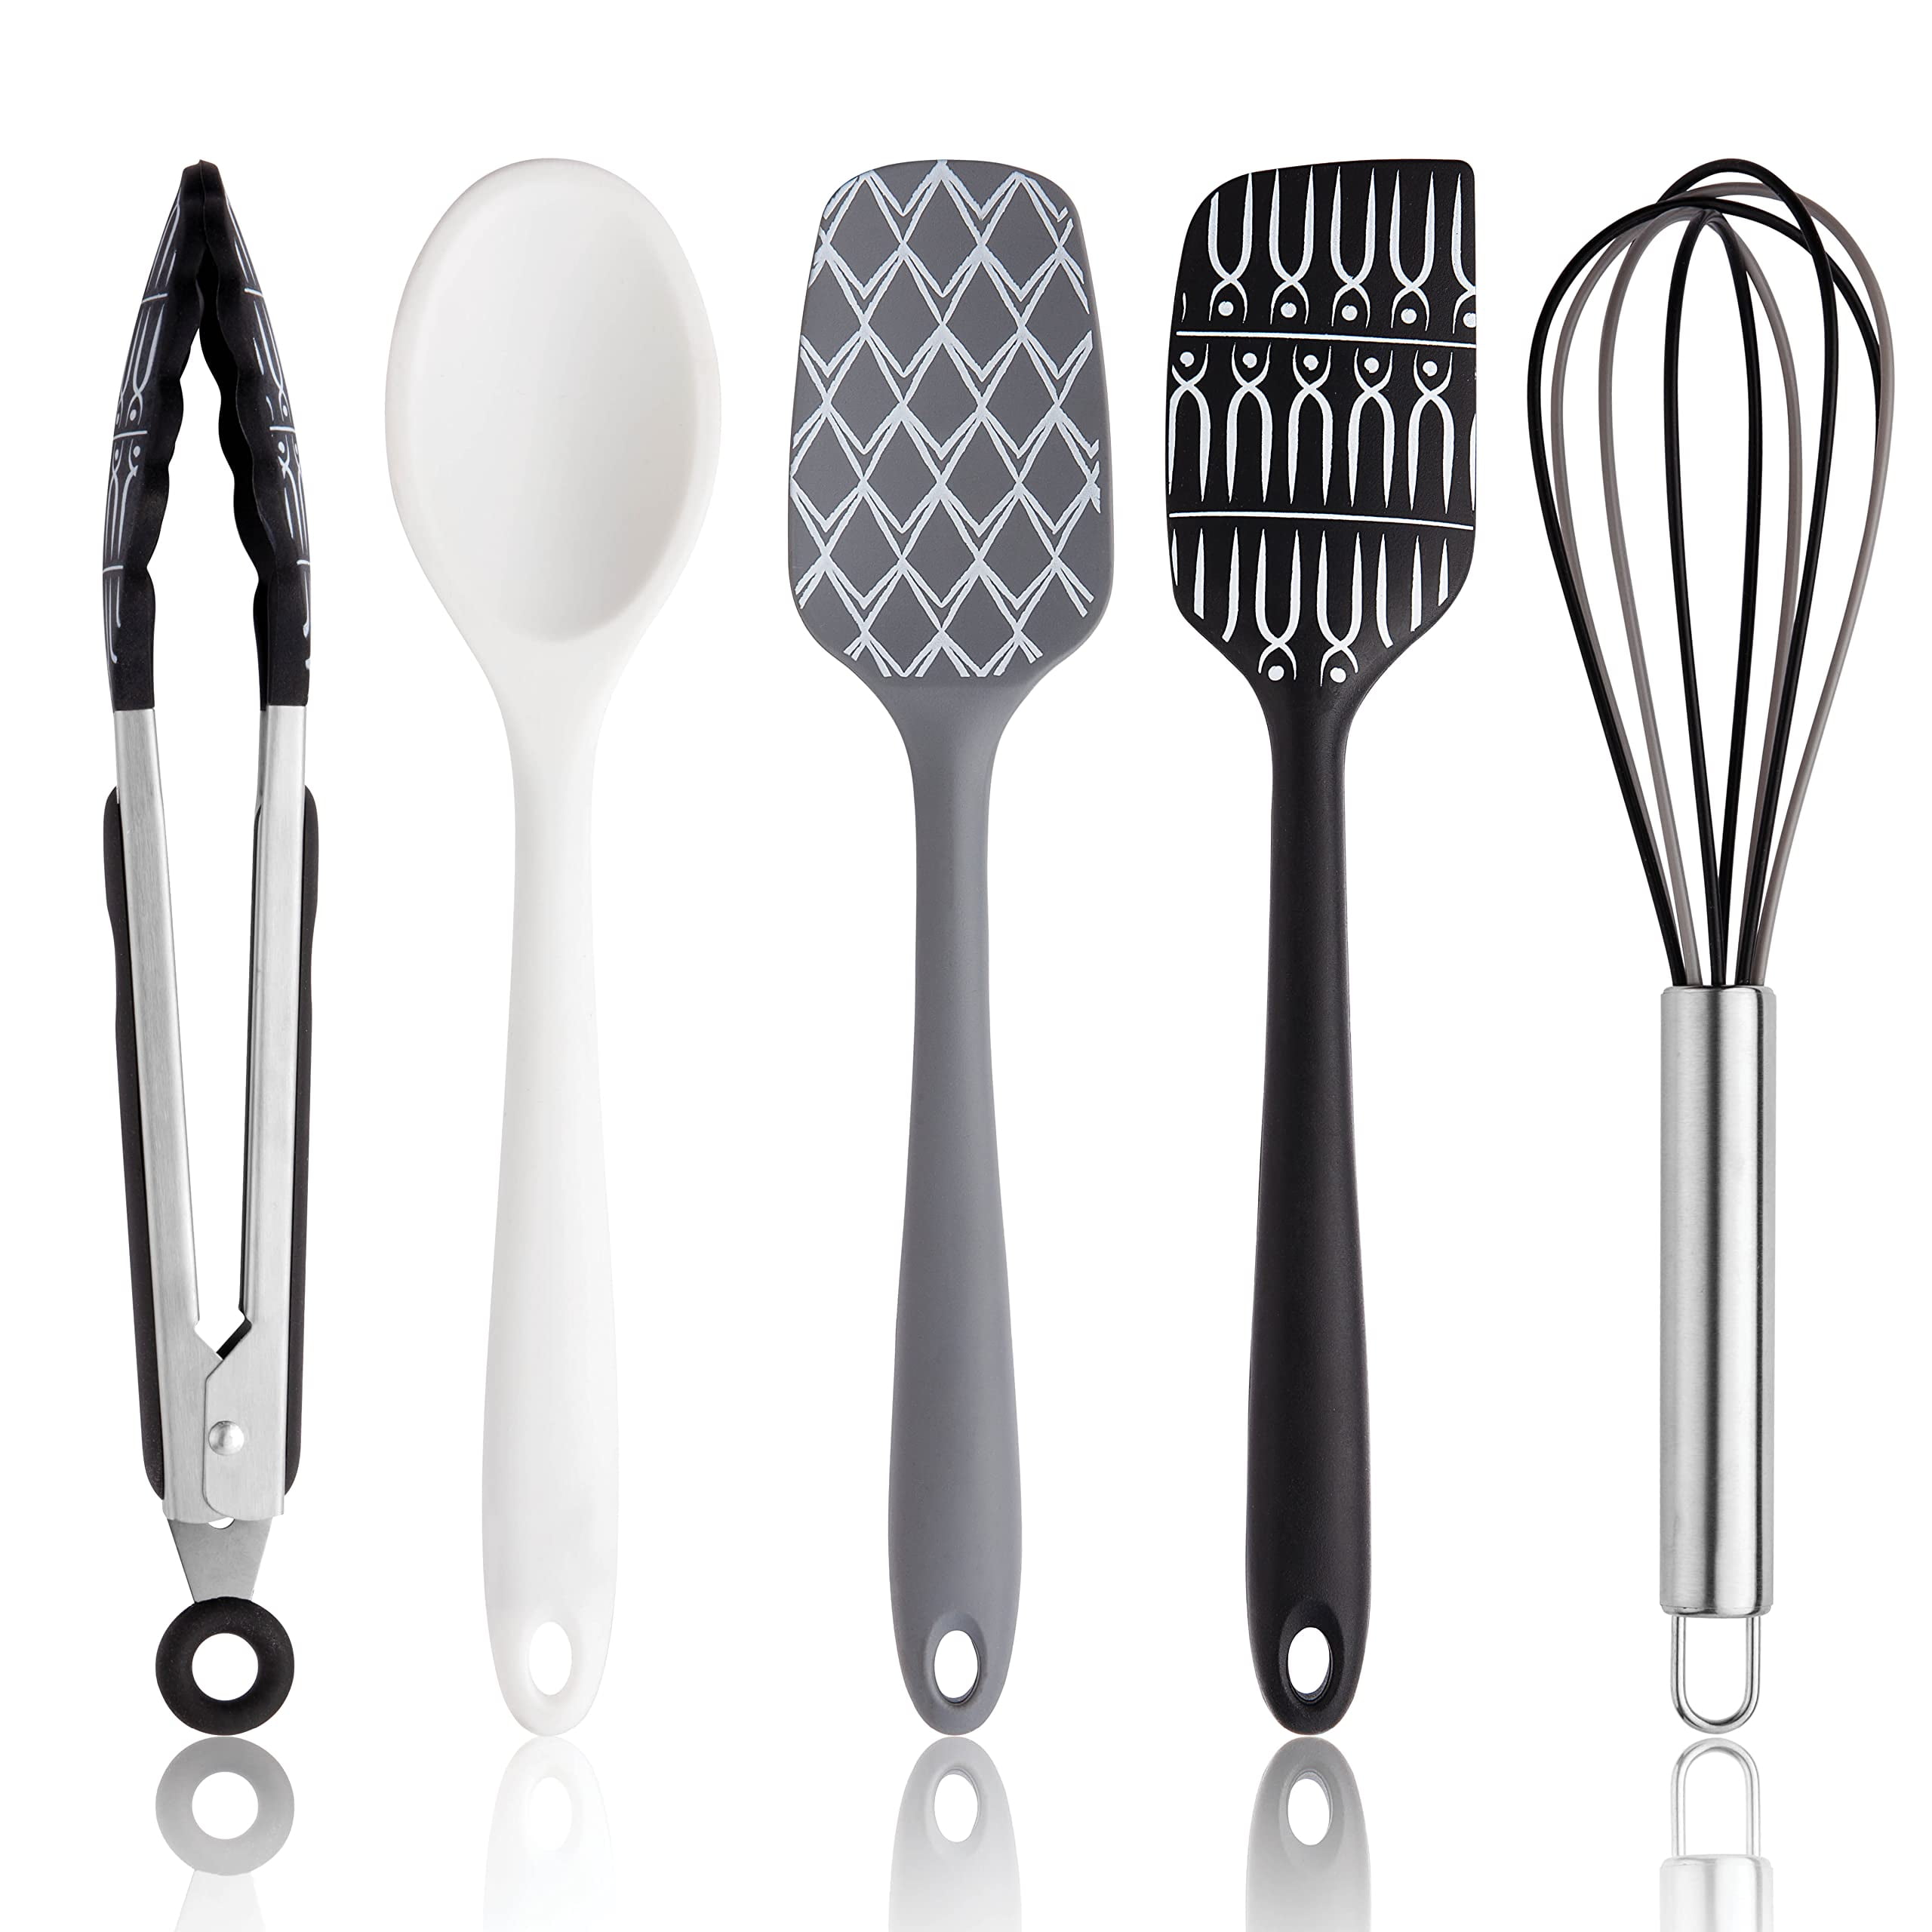 Nokstar Silicone Cook Utensils Set, 5 Piece Kitchen Cooking Set, Includes  Kitchen Tongs, Large Spatula, Small Spatula, Basting Brush, Whisk